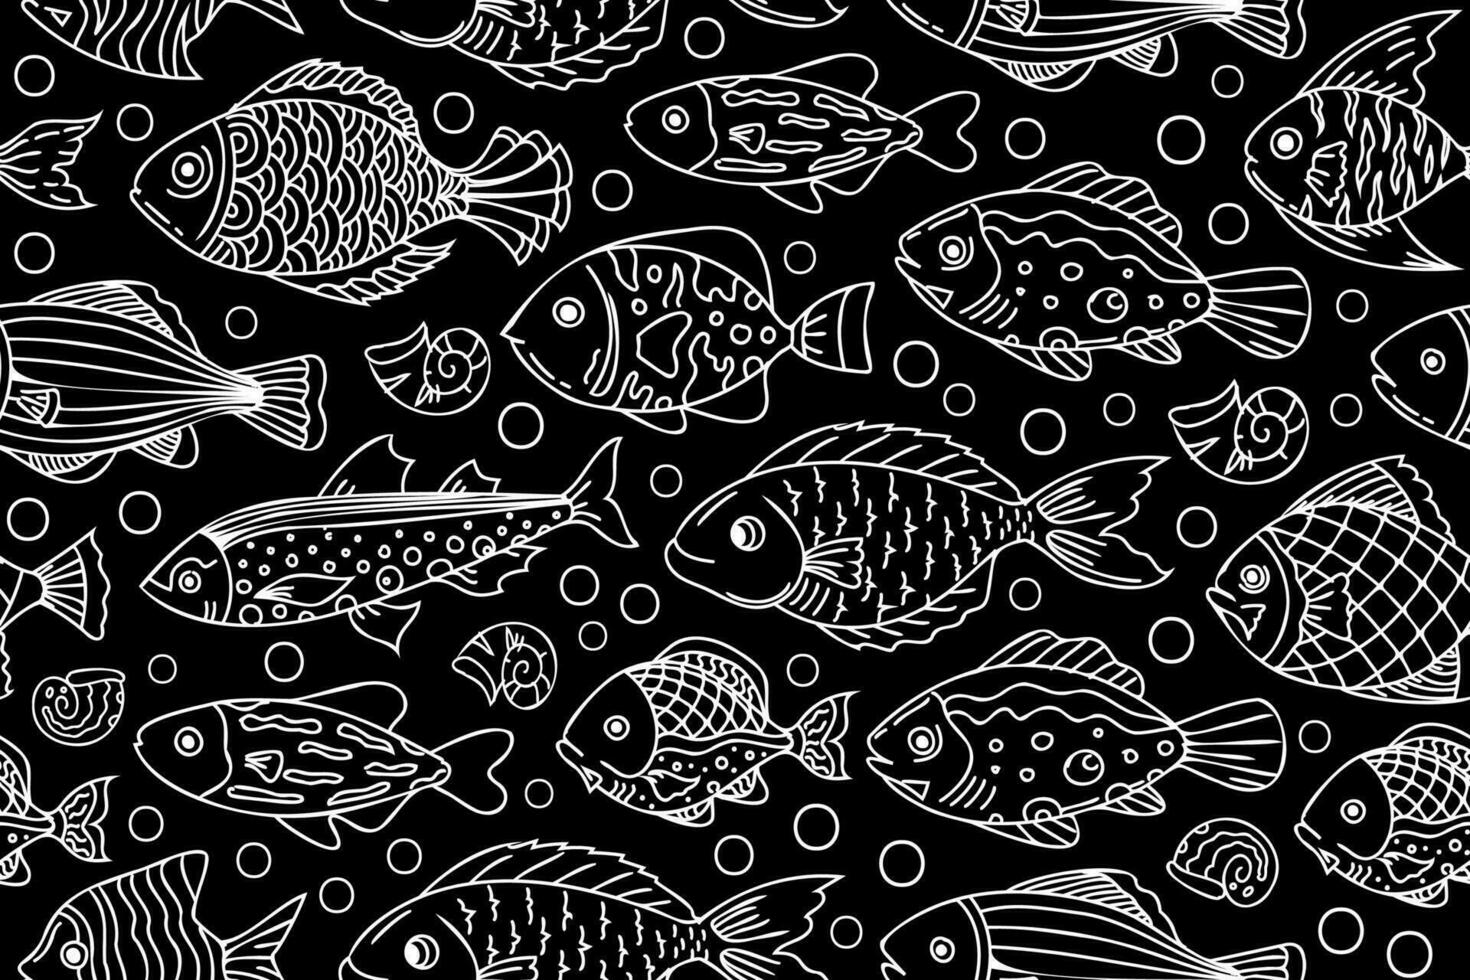 Black and white seamless fish pattern. Abstract pattern with white, hand drawn fishes on a black background vector